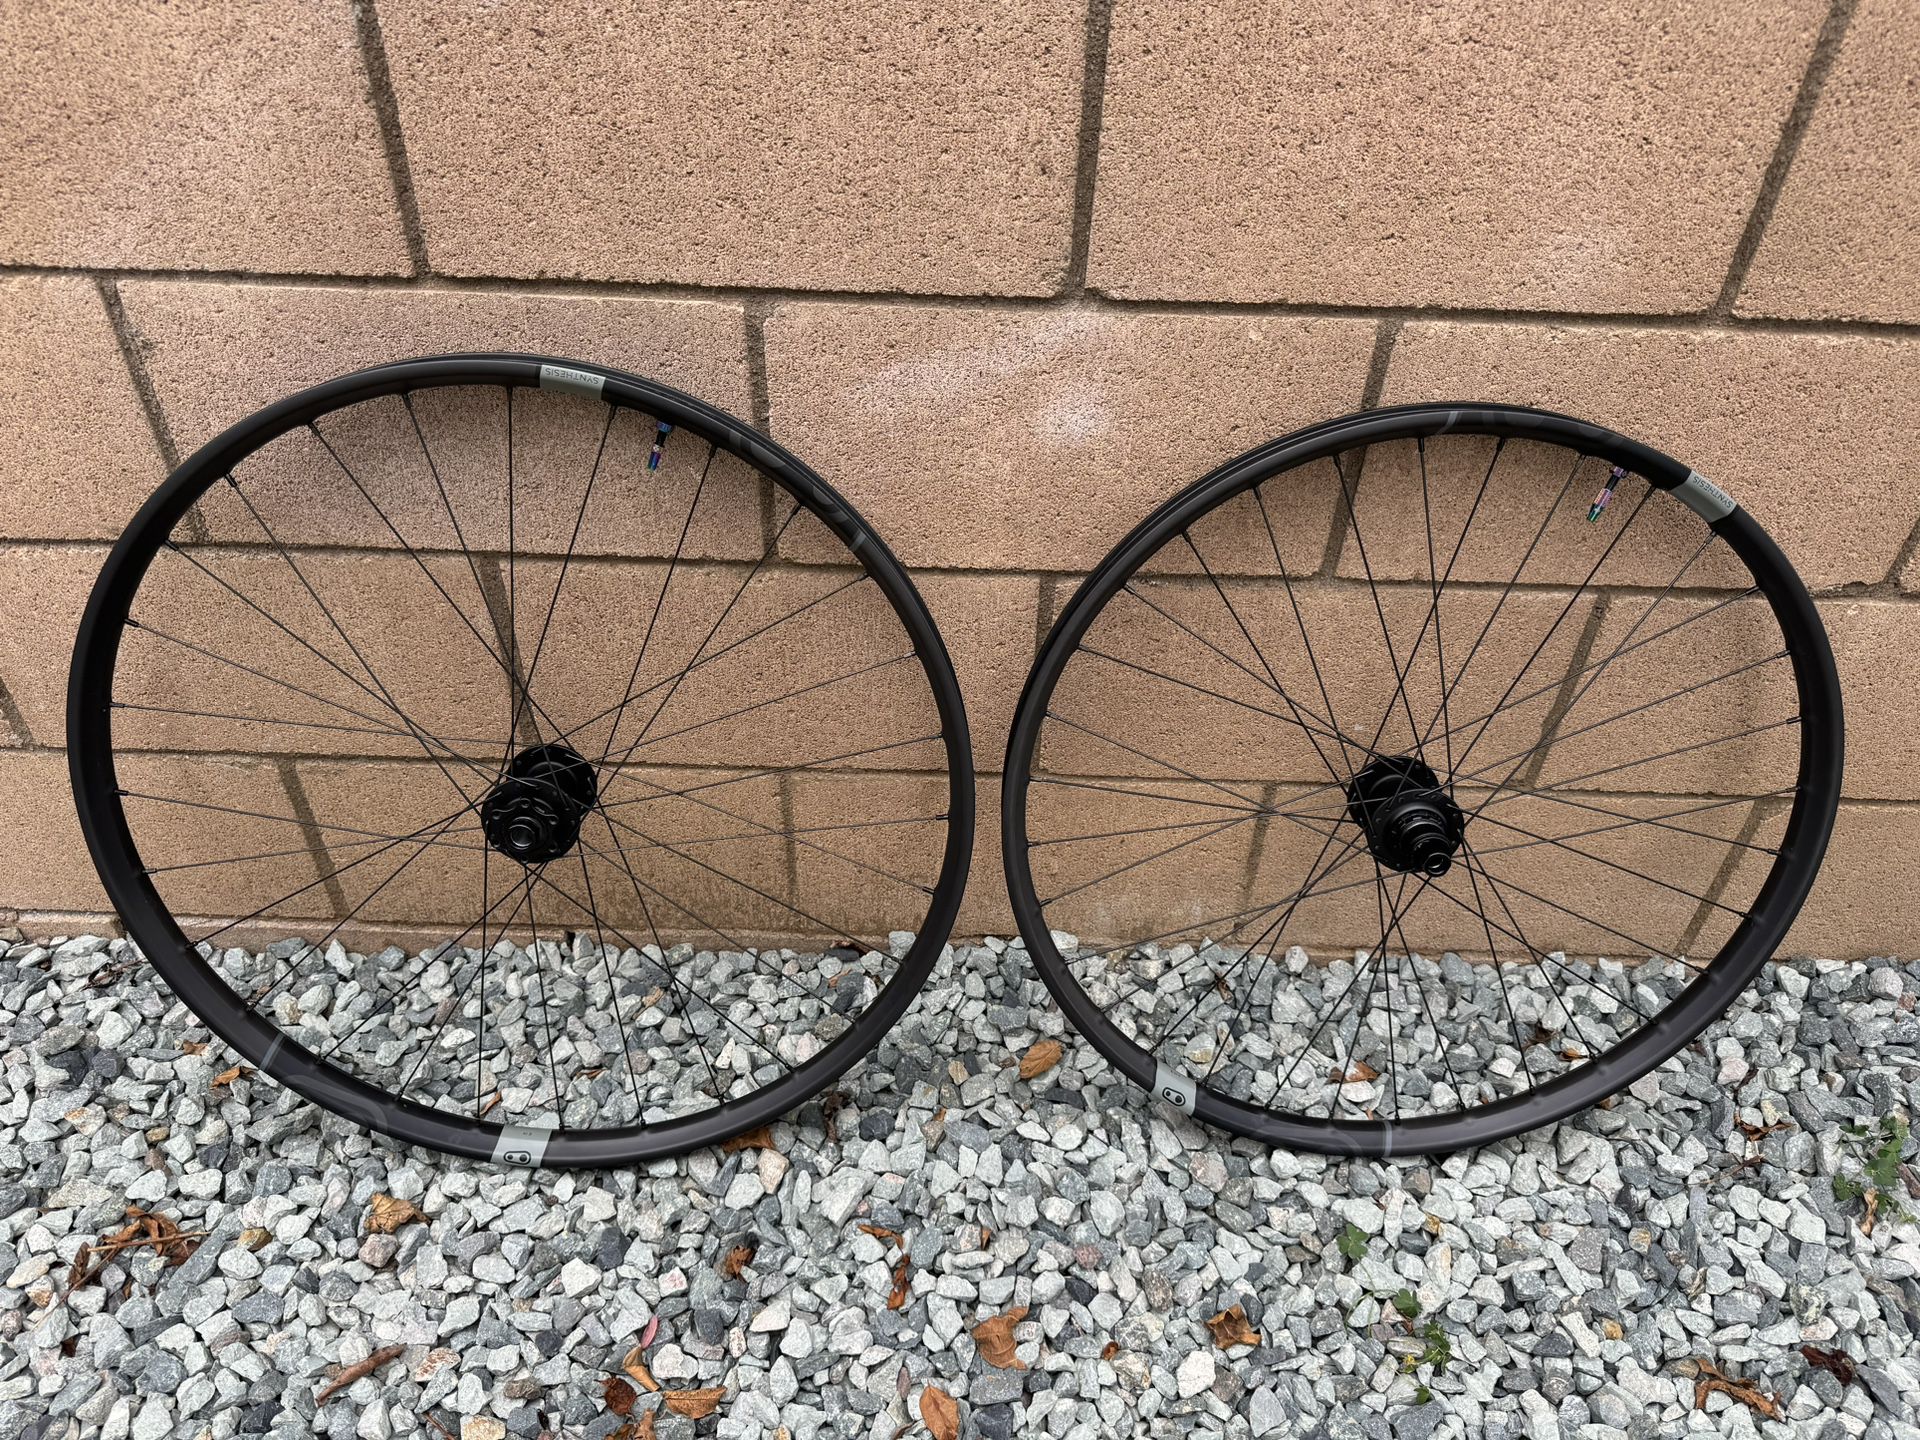 Carbon crank Brothers Wheelset Mullet Bicycle Mountain Bike YT Yeti Specialized NEW!! 29” 27.5” Wheels 